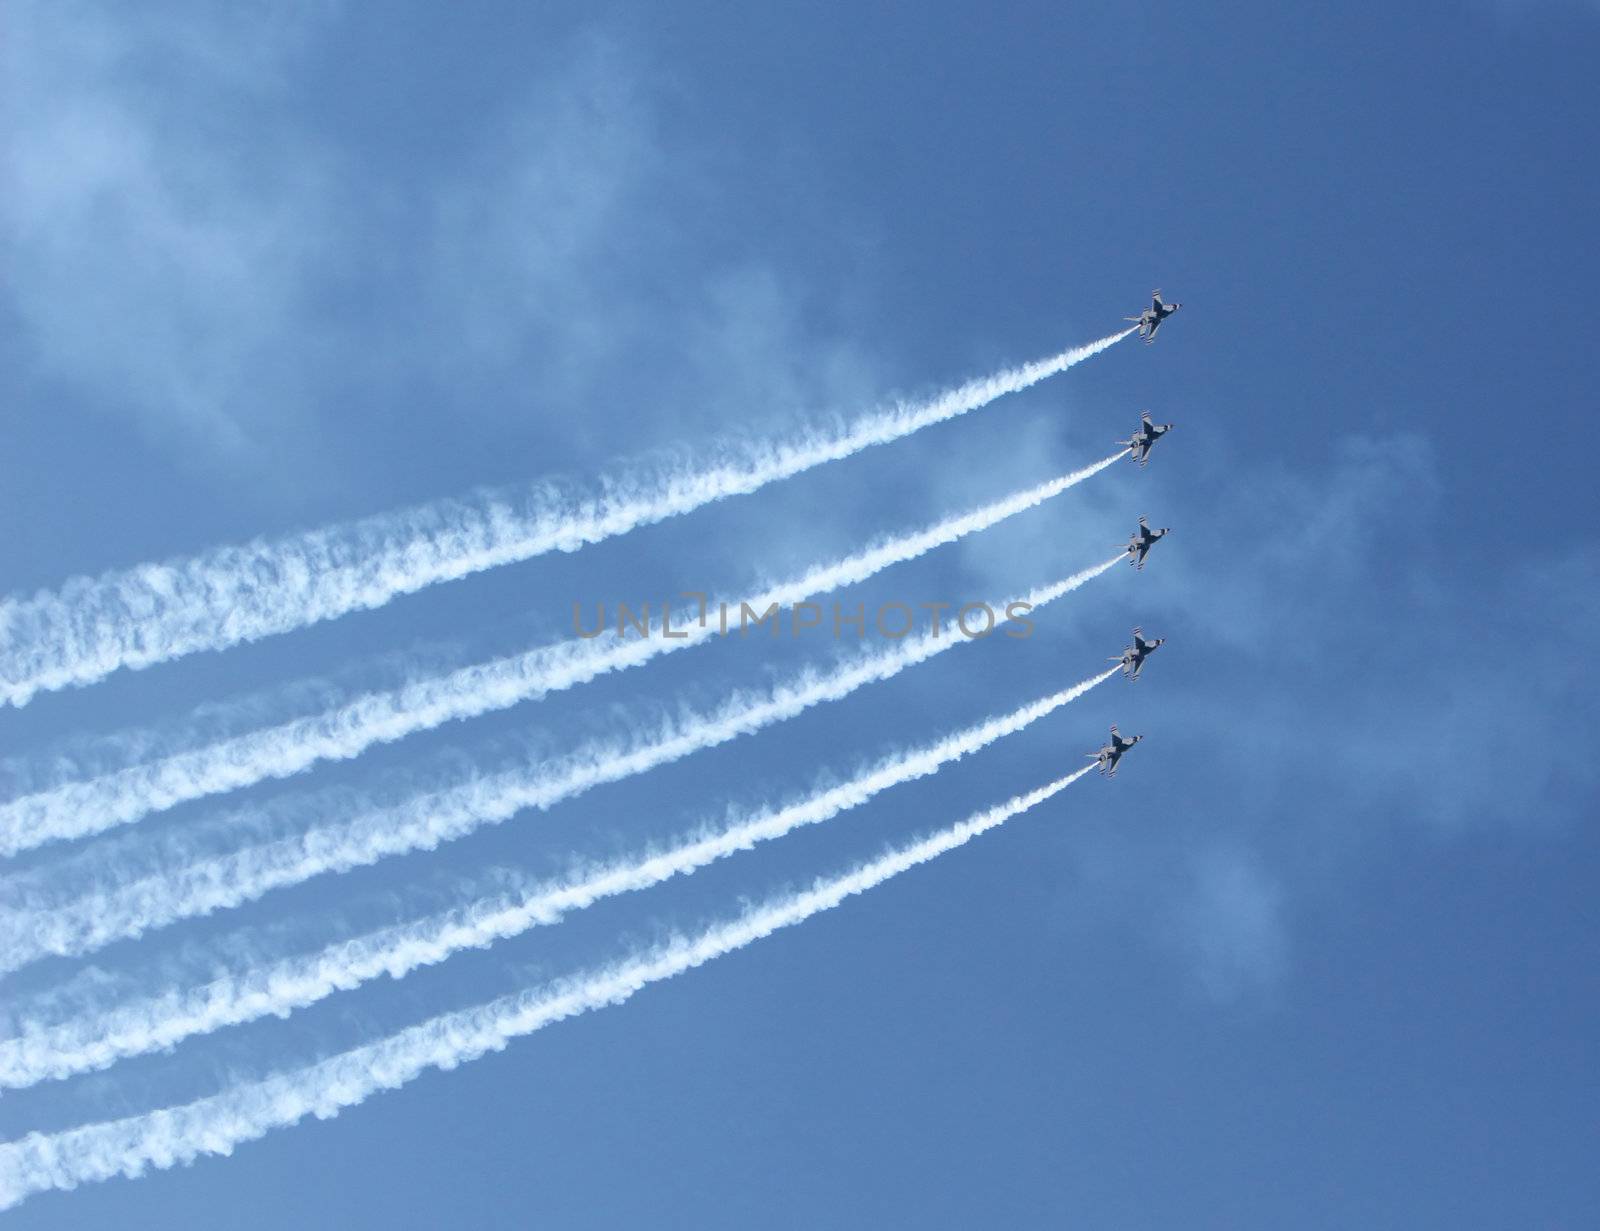 Five fighter jets flying in formation against a clear blue sky